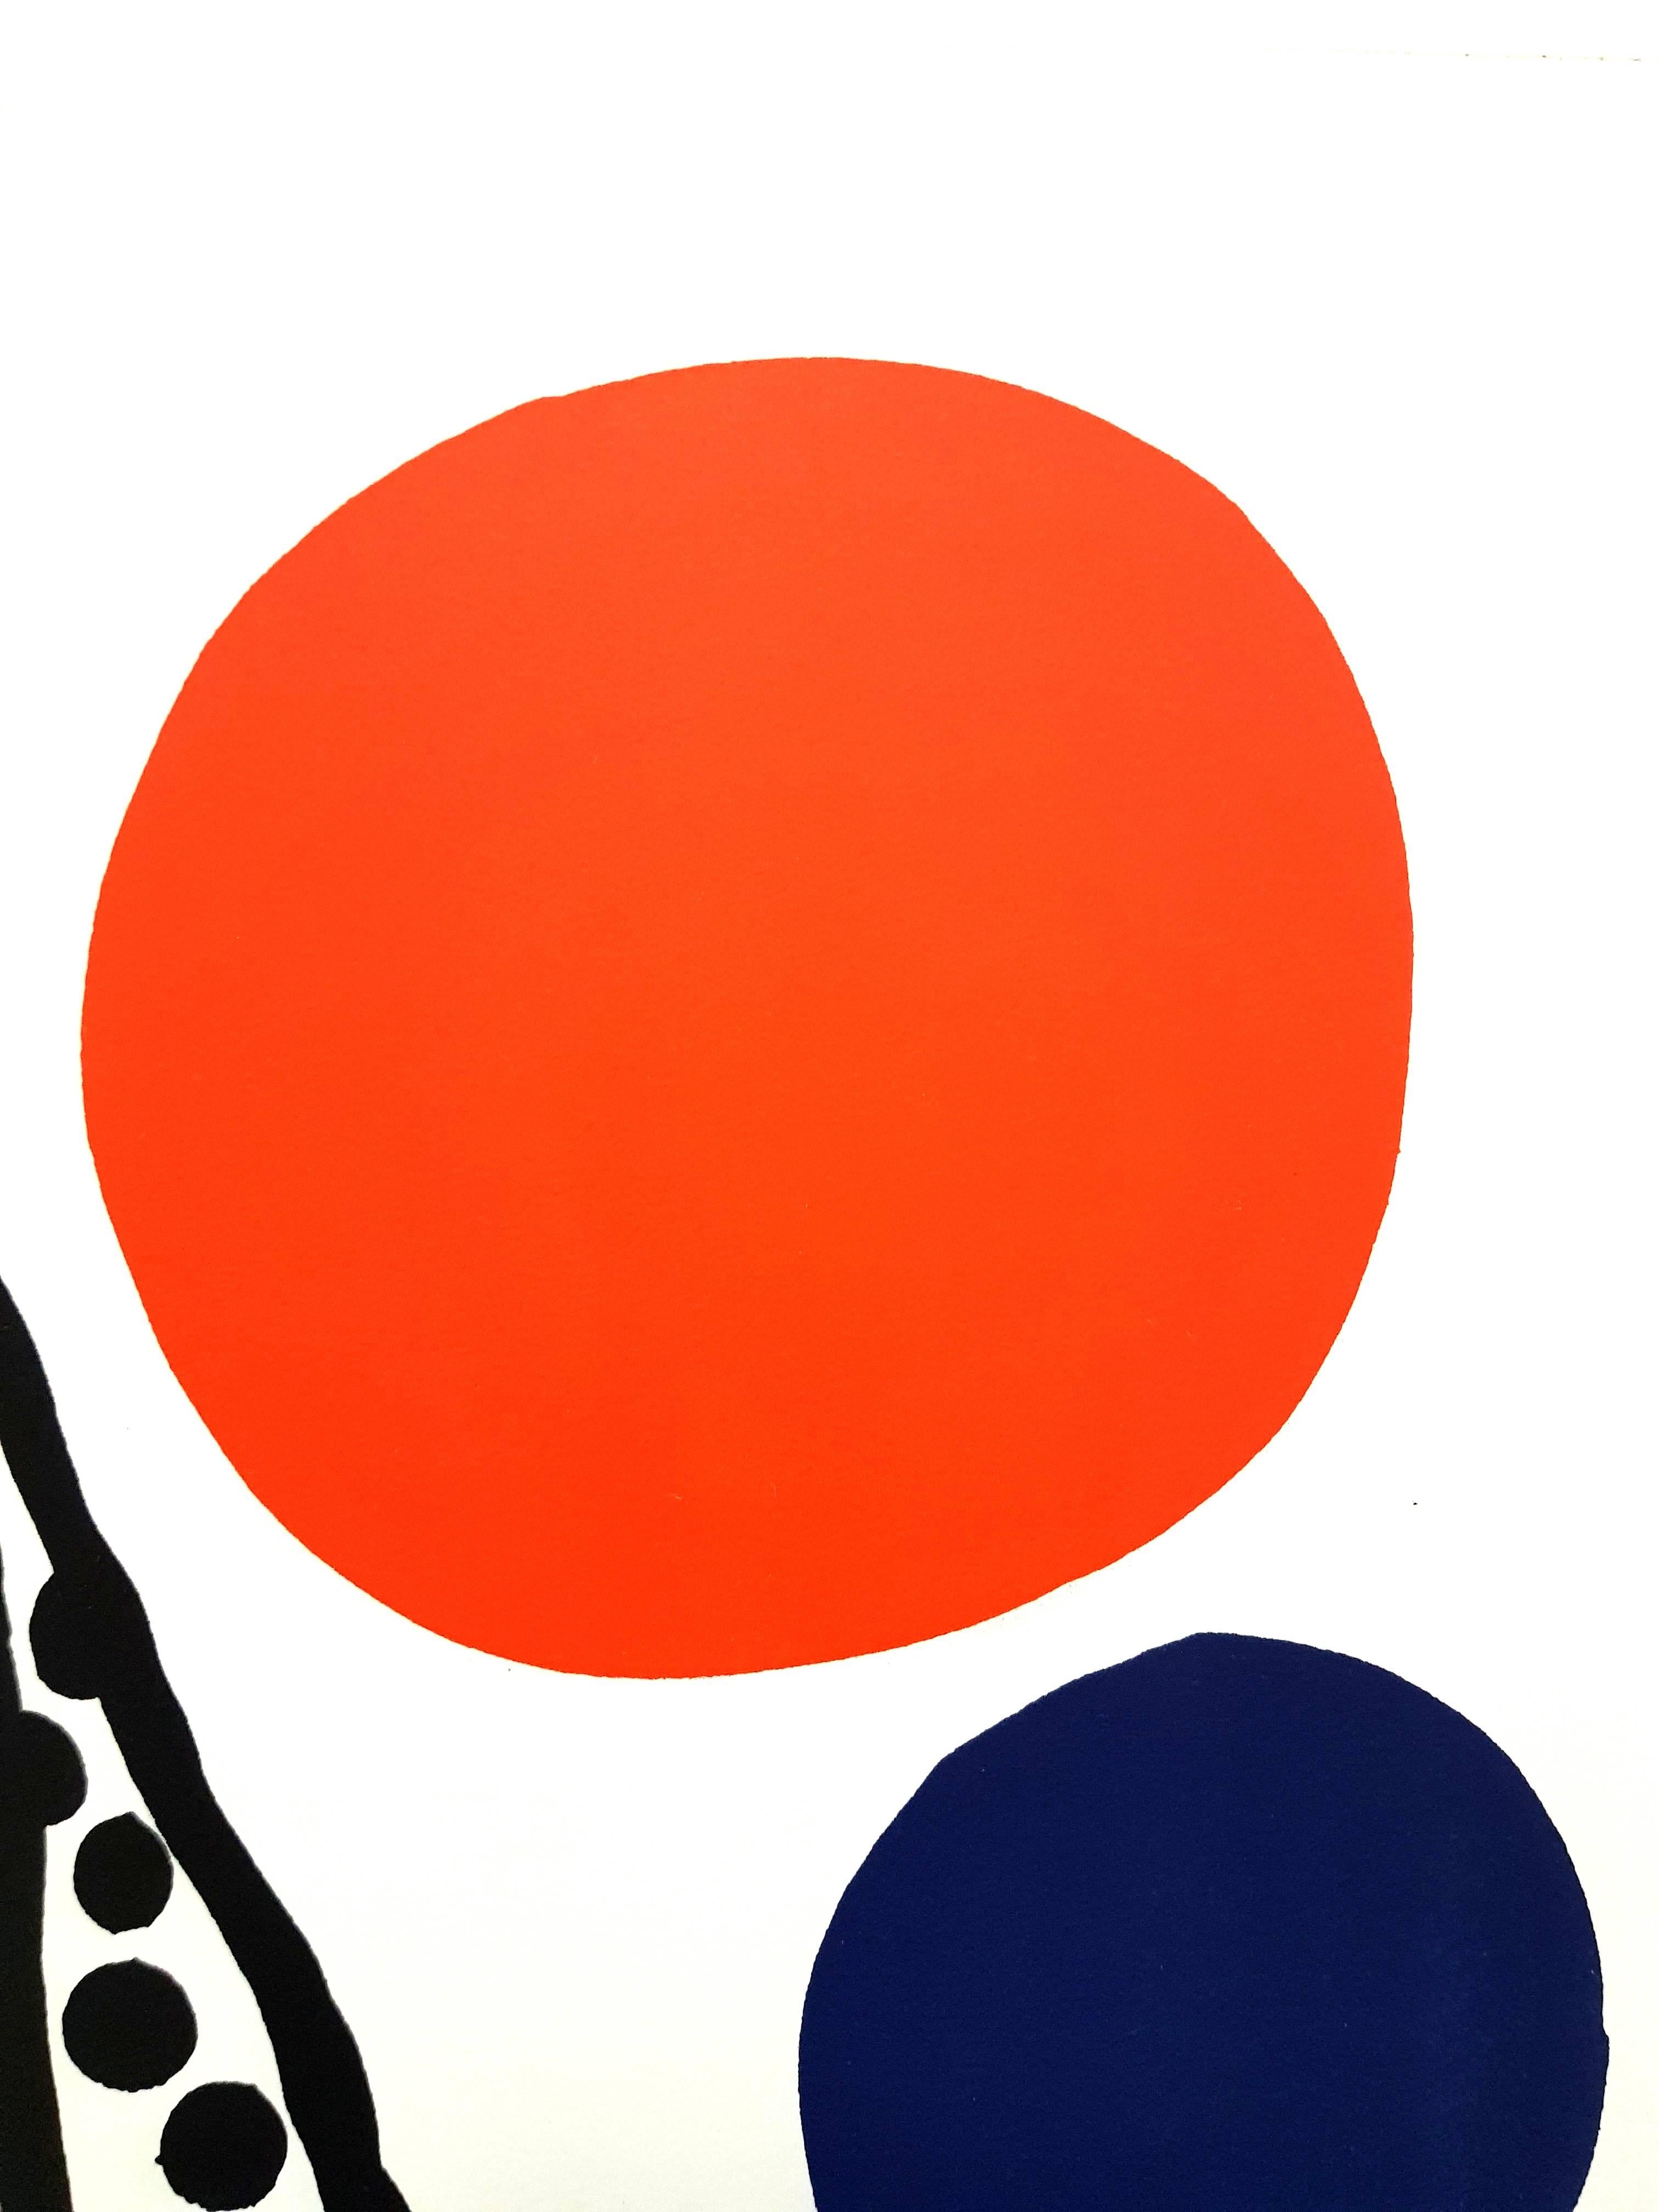 Alexander Calder - Original Lithograph - Composition
1965
From the deluxe edition of the book 